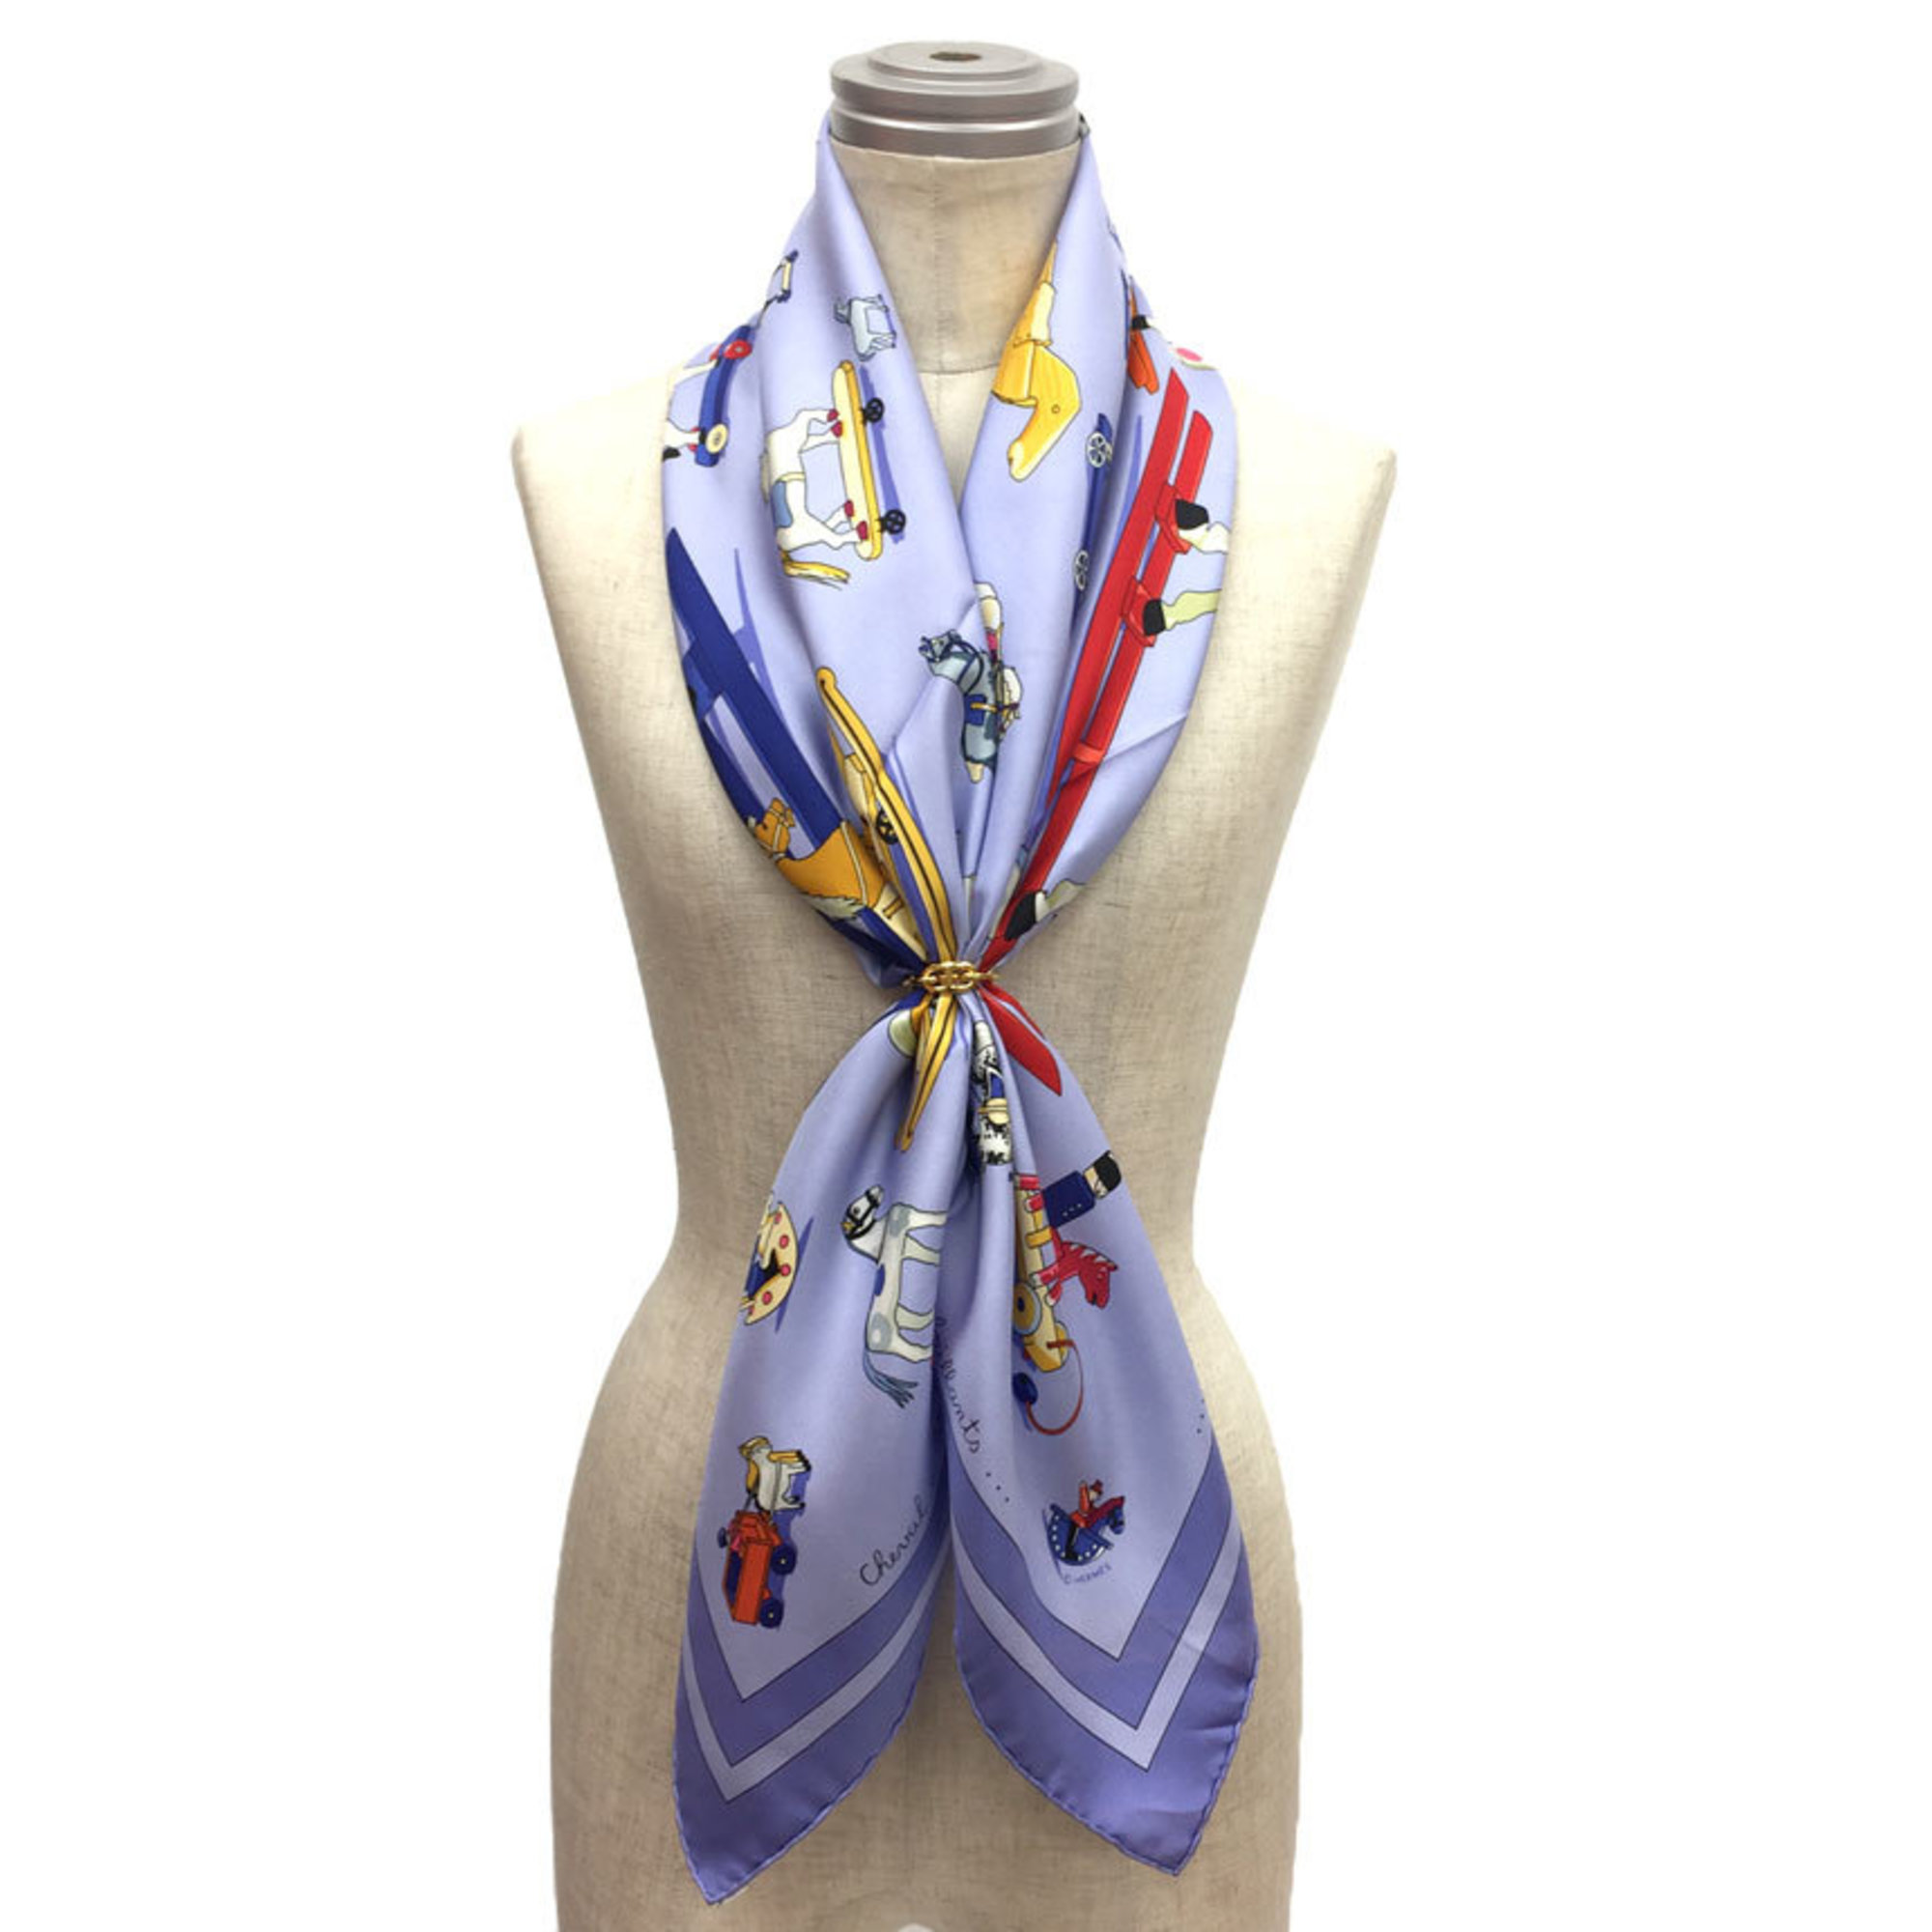 HERMES Hermes Carre 90 Scarf Muffler Raconte moi le cheval (Talking about horses) Lavender Silk aq7382